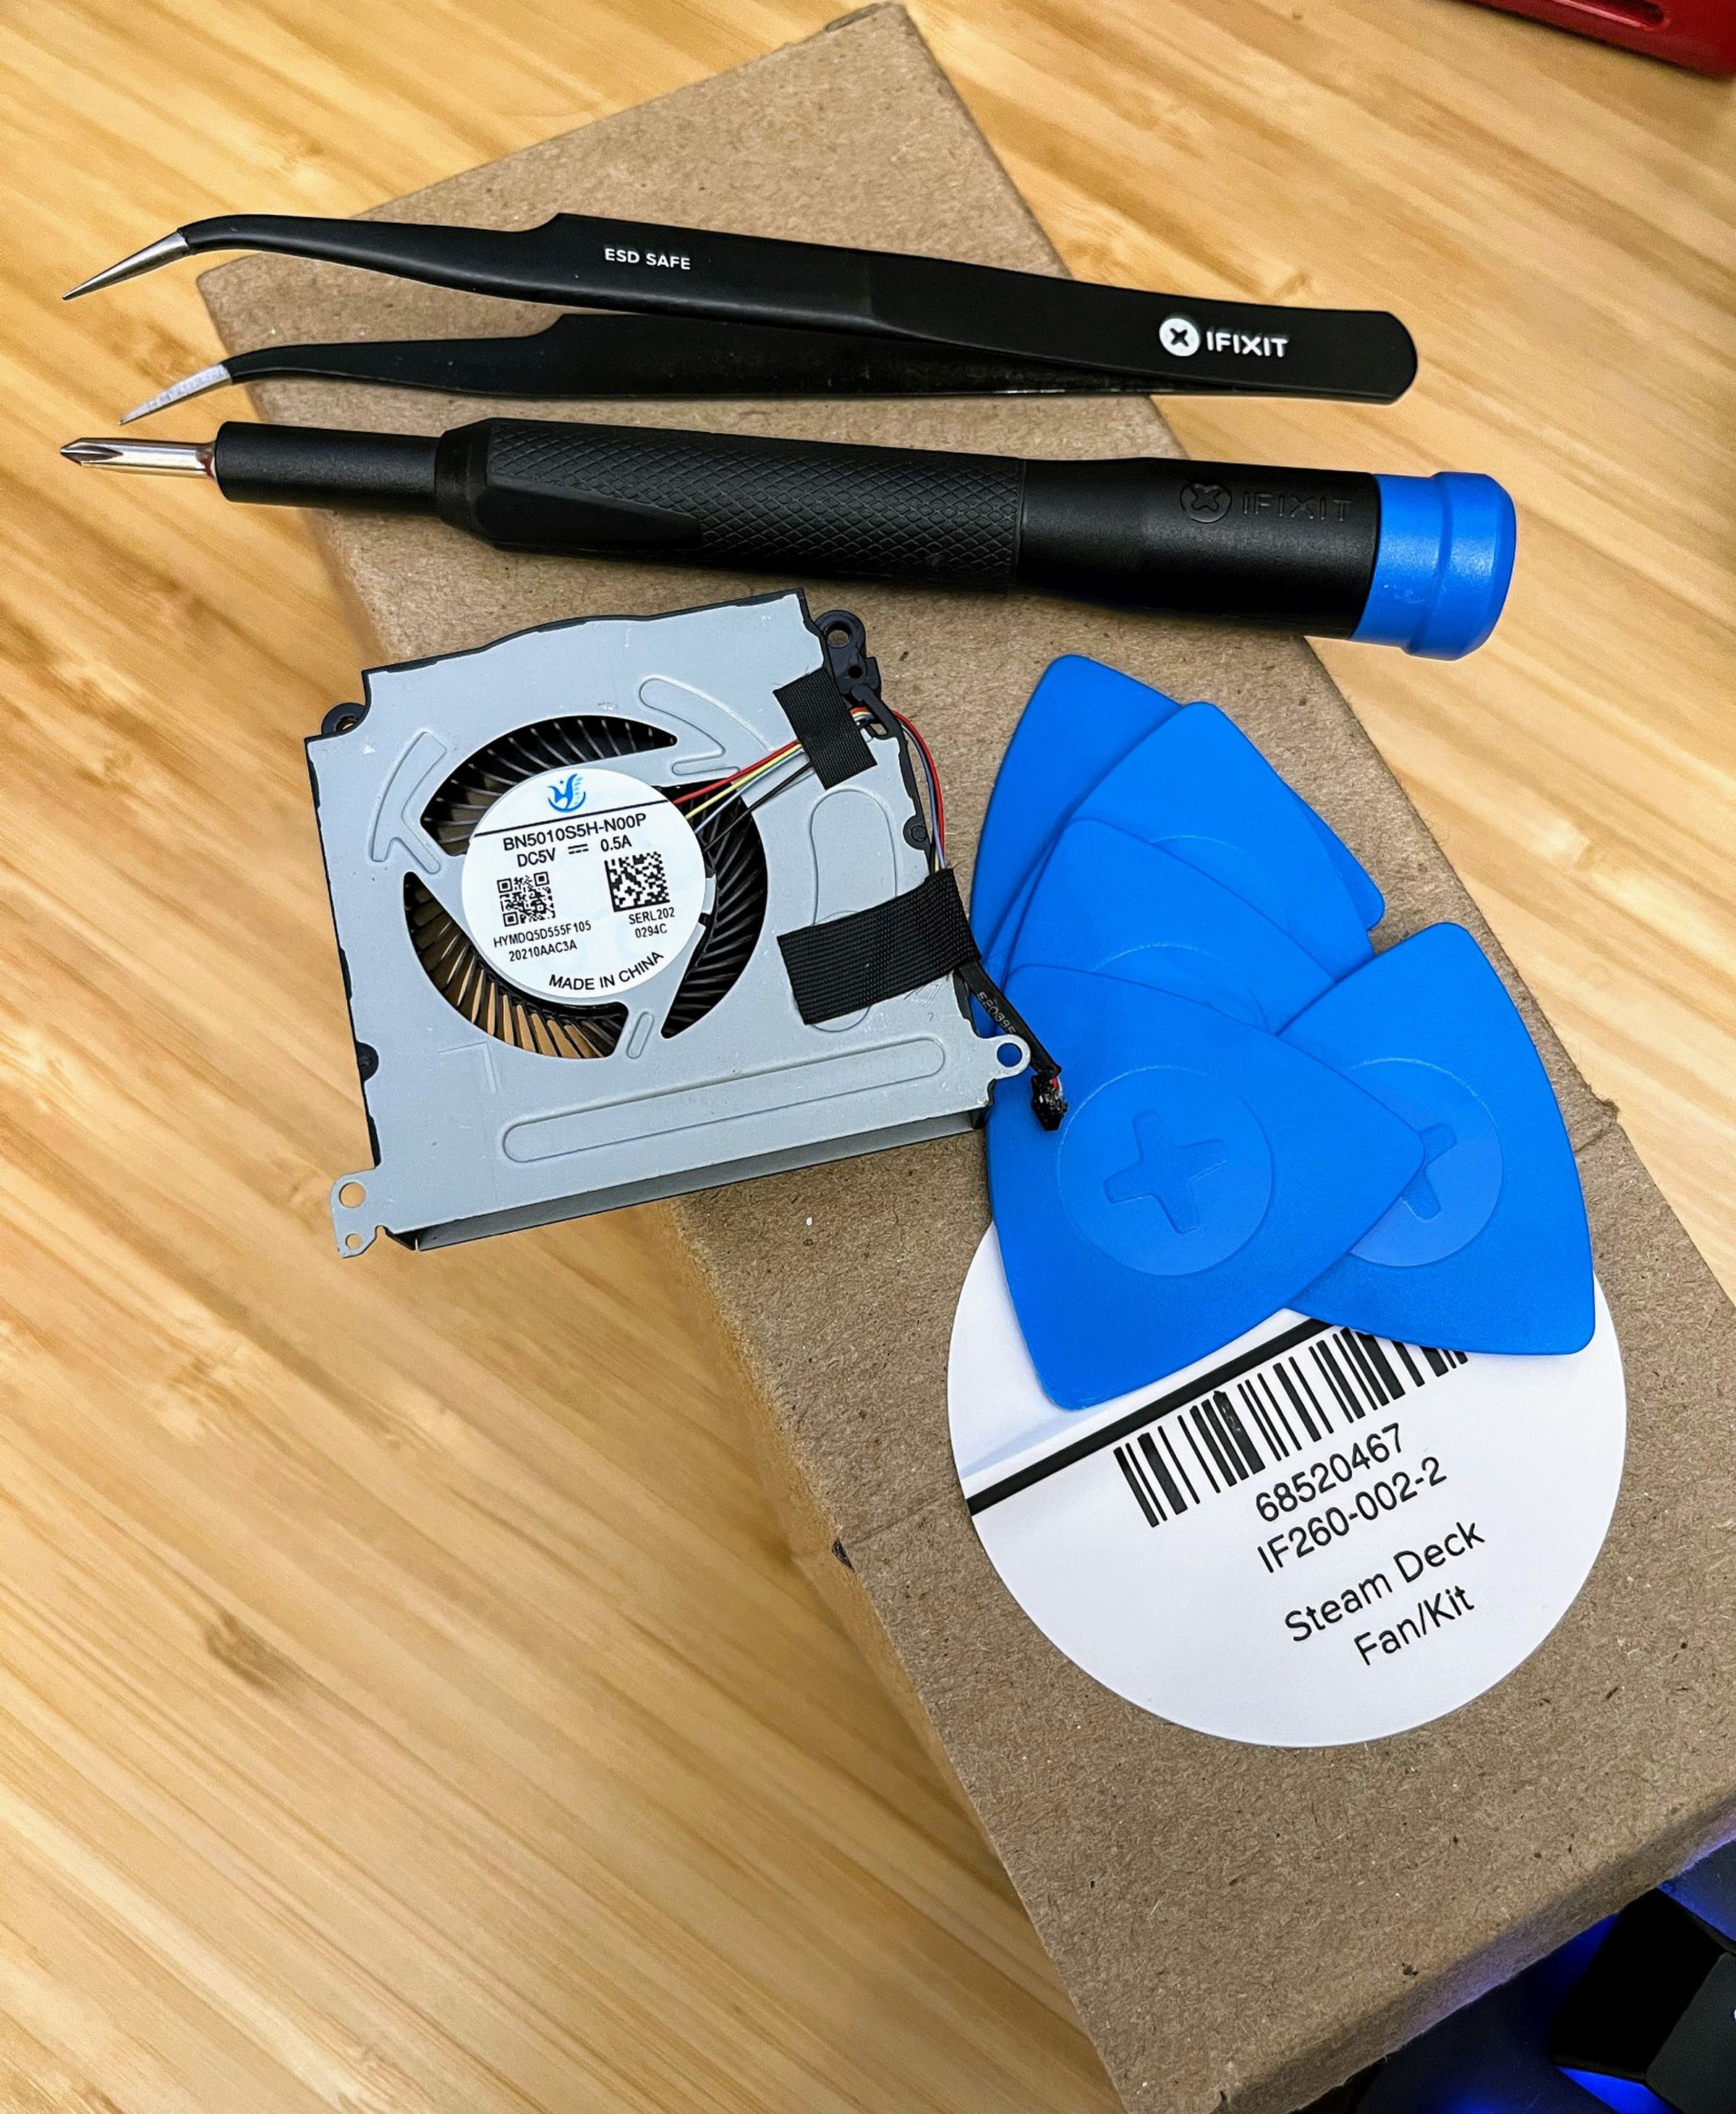 The $30 iFixit kit comes with picks to open the Deck, a screwdriver and ESD-safe tweezers, and the fan.